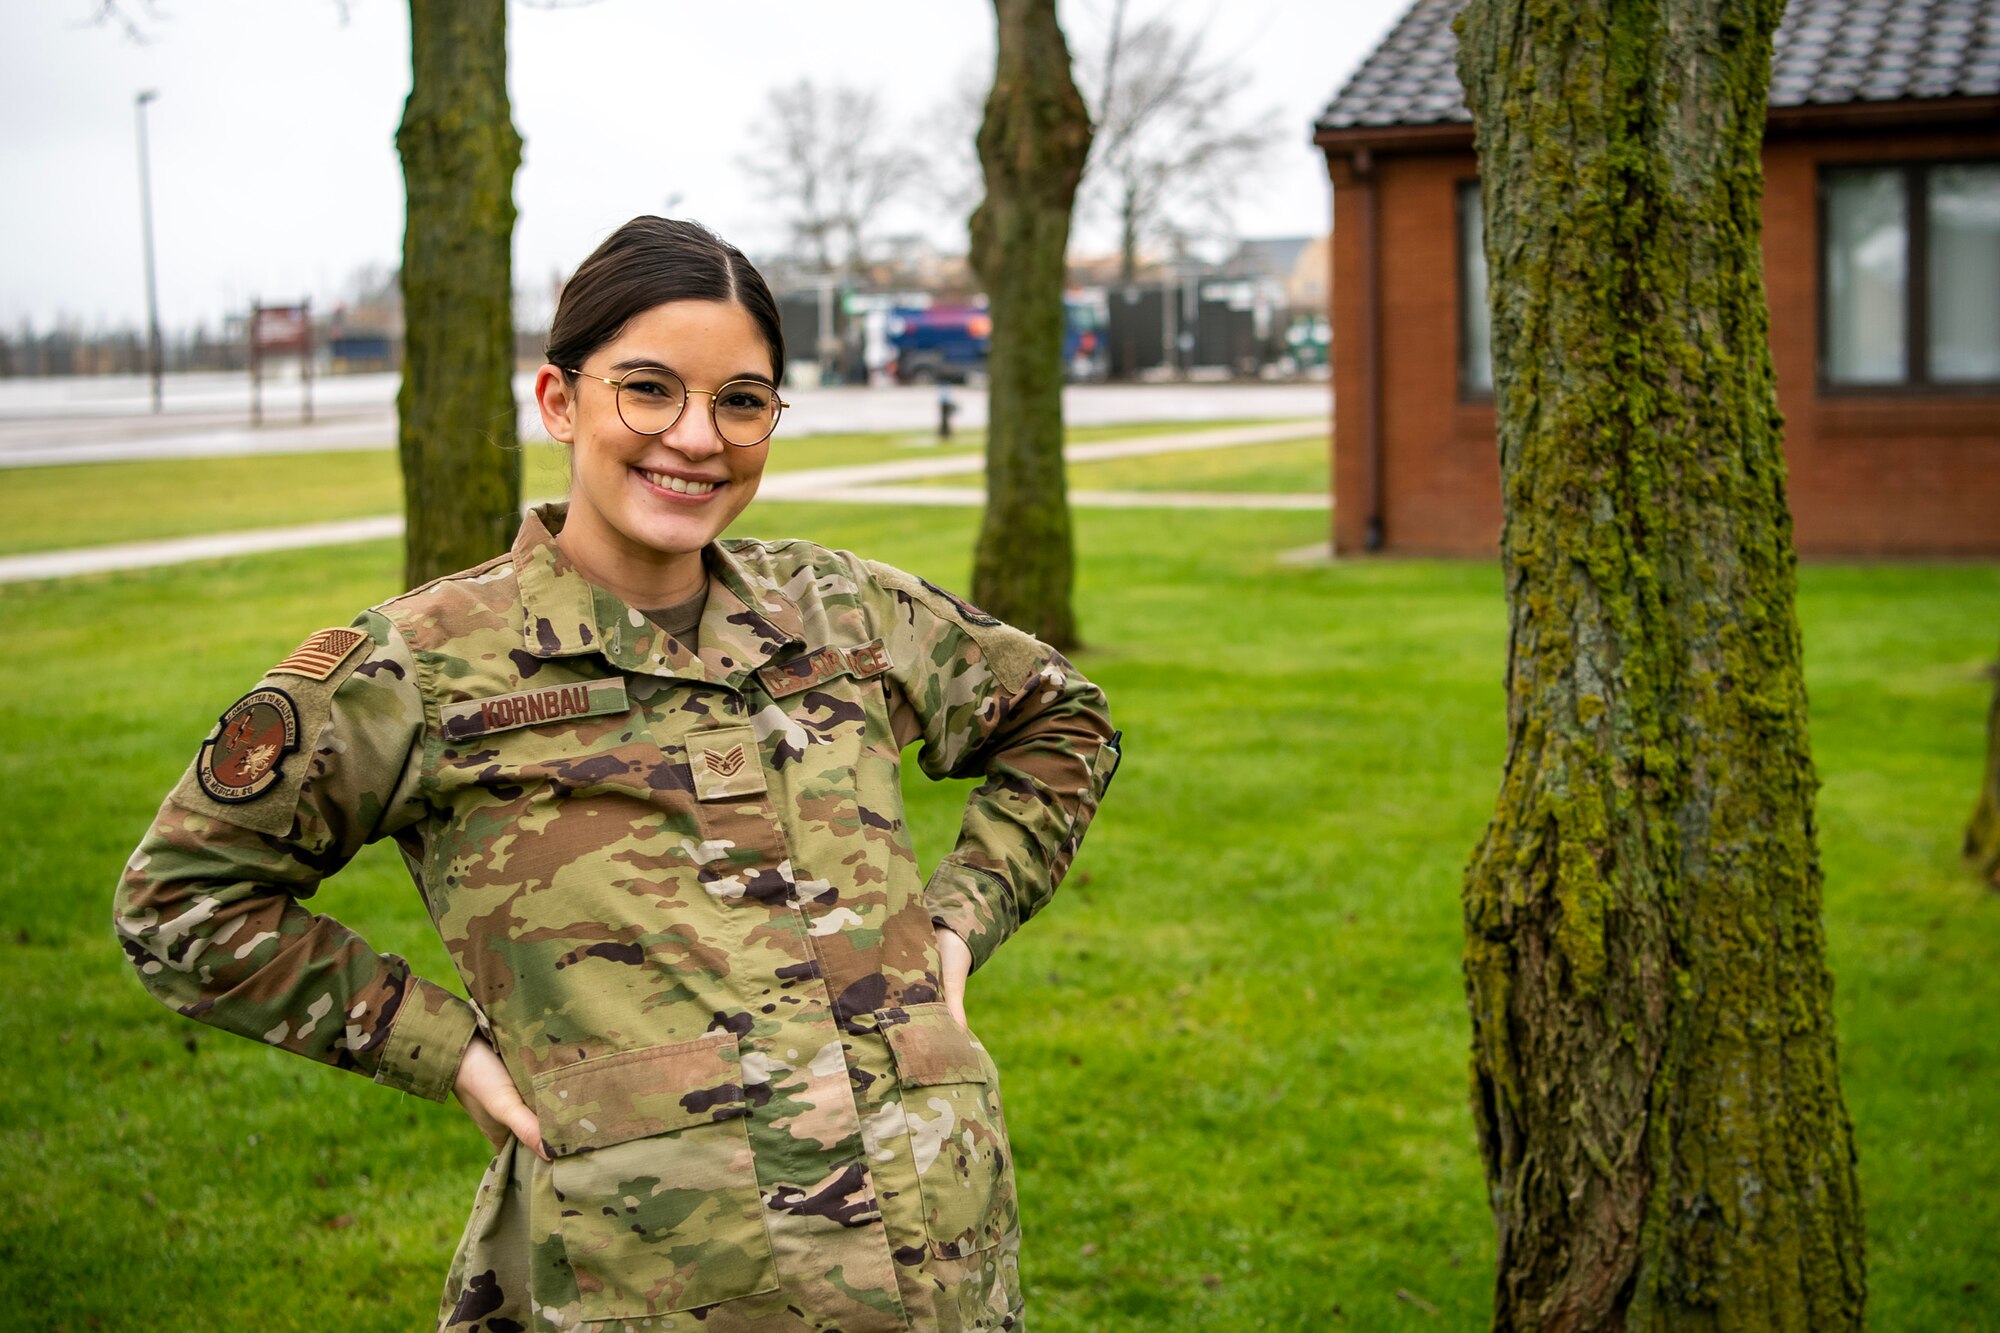 U.S. Force Staff Sgt. Shae Kornbau, 423d Medical Squadron NCO in charge of Preventative Dentistry, poses for a photo at RAF Alconbury, England, March 7, 2023. This photo is part of a project to highlight female Airmen from across the wing in honor of Women's History Month. (U.S. Air Force phot by Staff Sgt. Eugene Oliver)